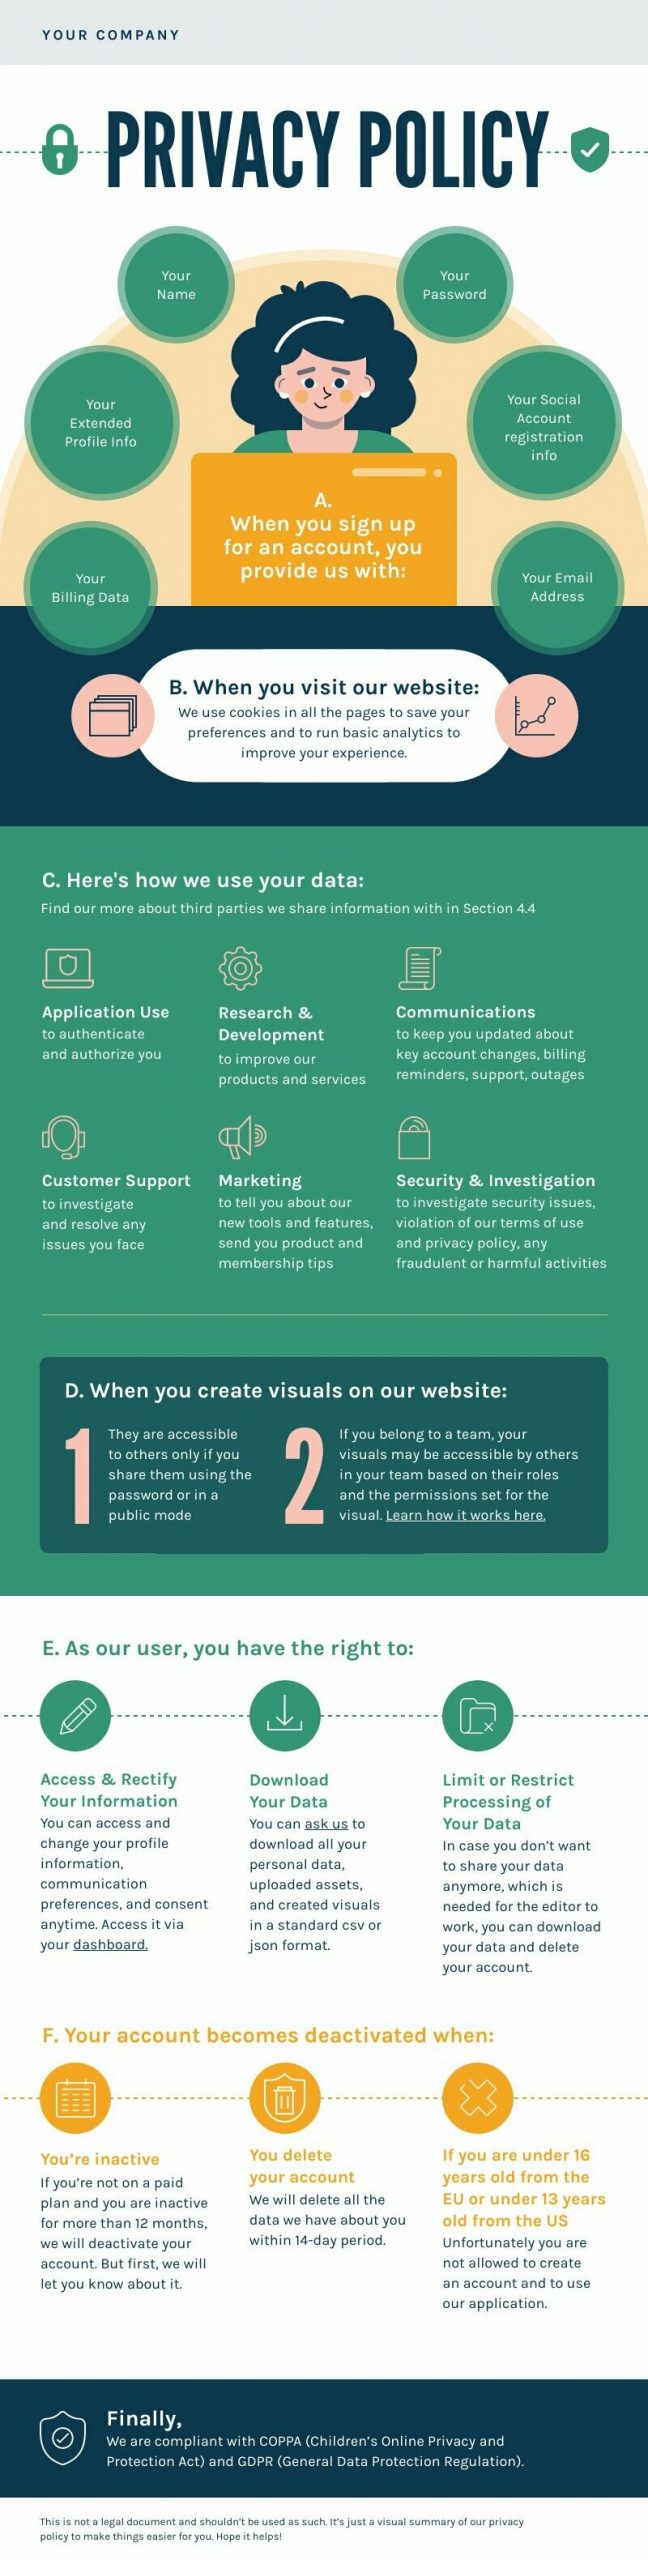 Privacy Policy Infographic Template